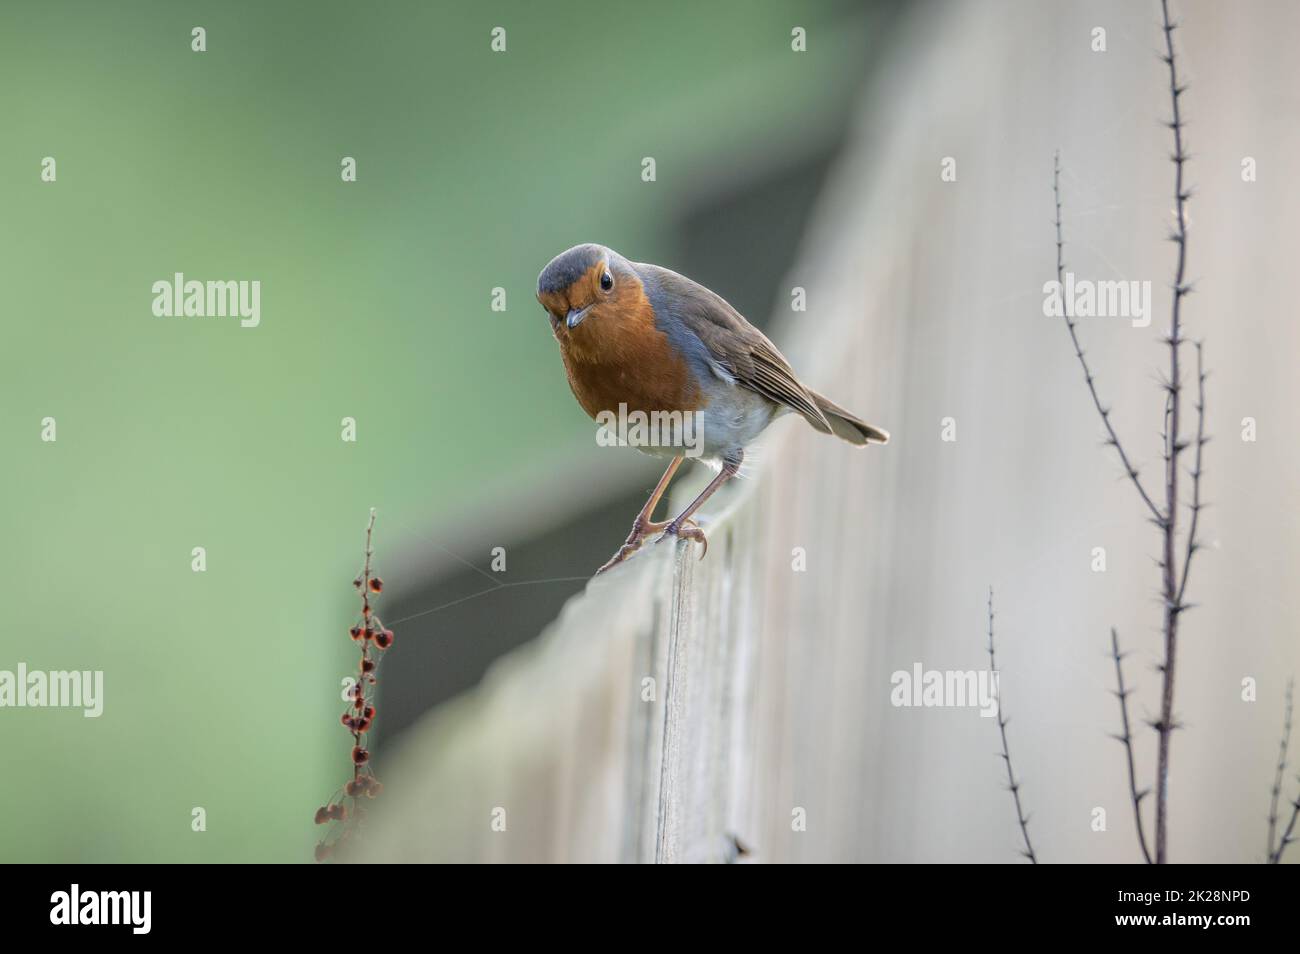 Robin on a fence Stock Photo